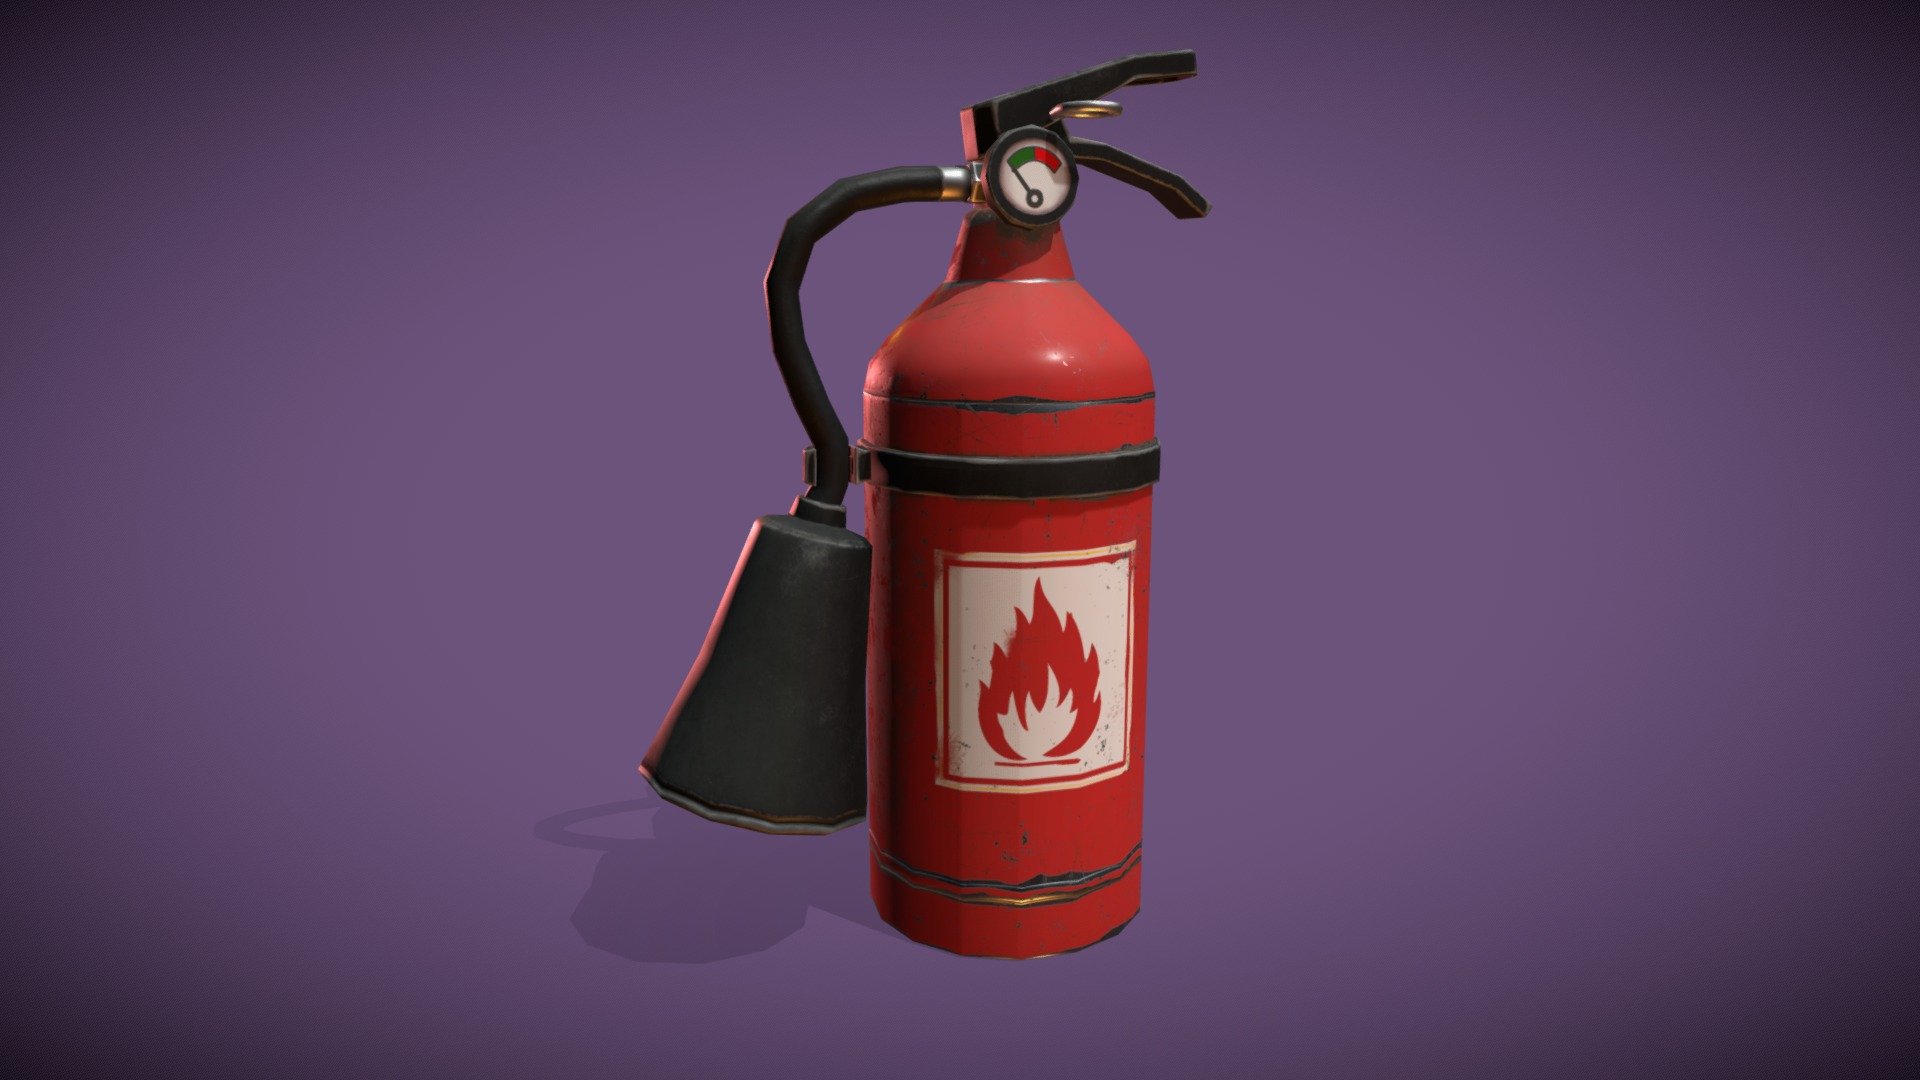 Stylized Fire Extinguisher!




This is a Low Poly Stylized Fire Extinguisher as seen on the preview images.

Hand Painted details with PBR Metal for a timeless stylized look.

Includes PBR Metal/Rough detail.

FBX included

Game Ready!

Meshes + Textures:




Poly Count: 737

Texture Maps: Diffuse/Colour, Normal, Roughness

Texture Sizes included: - 2048 x 2048

Features:




Stylized hand painting texturing.

Clean mesh with no co-planar faces or isolated vertices.

No corrections or cleaning up needed.

Correctly named in English.

Pivot has been placed on the trigger.

Unreal Engine




Tested in the Unreal Engine.

Created to UE4 Scale.

Pivot point placed for easy drag + drop in engine.

ORM maps included for correct Unreal engine material setup.
 - Fire Extinguisher - Stylized Low-poly 3D model - Buy Royalty Free 3D model by polysassetstore 3d model